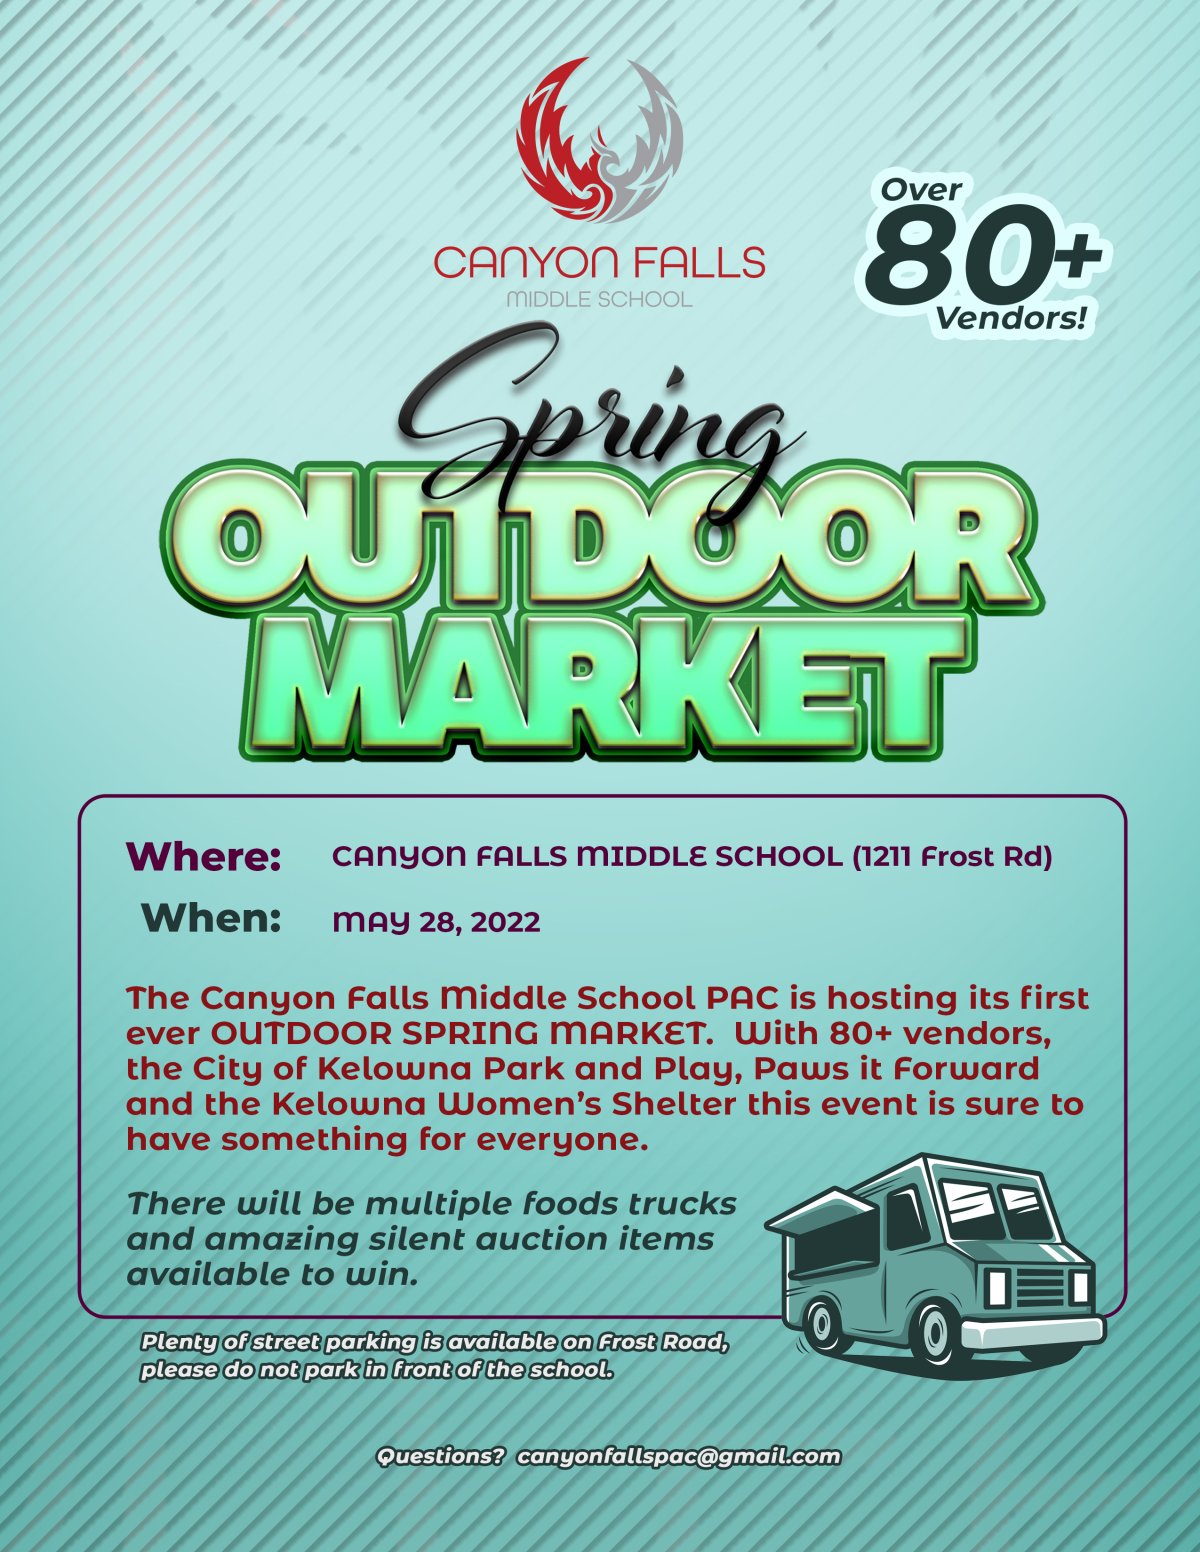 Canyon Falls Middle School Spring Outdoor Market - image